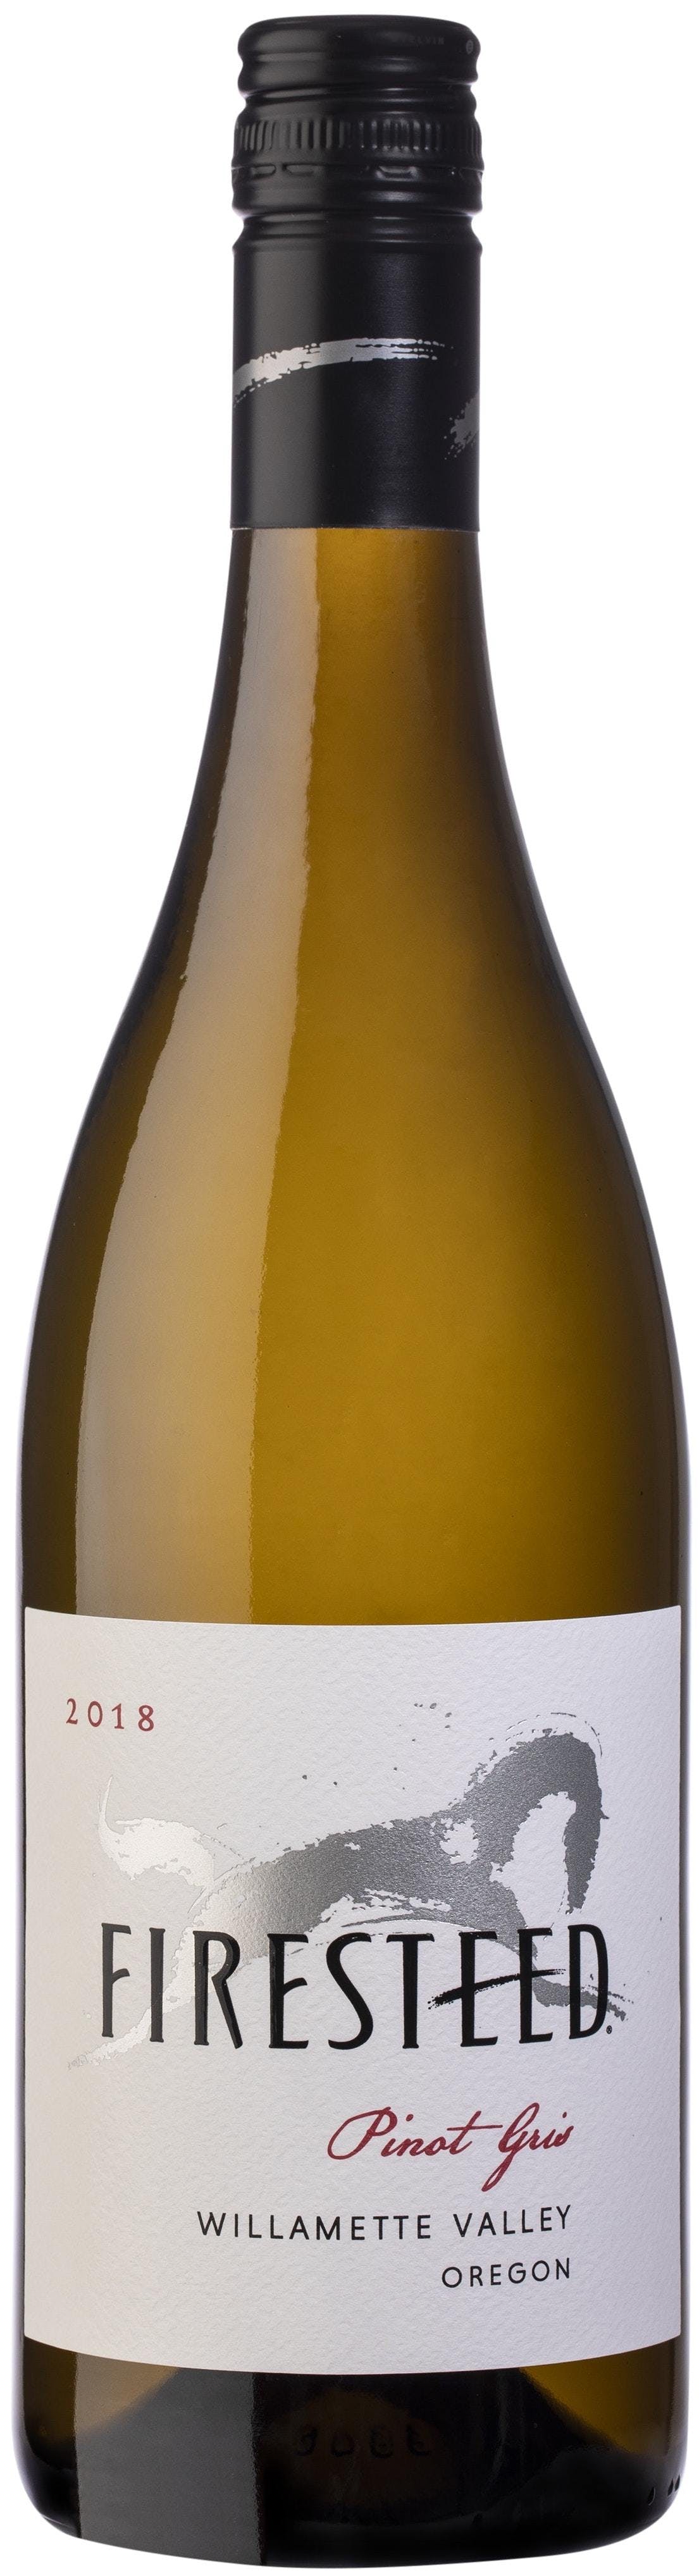 images/wine/WHITE WINE/Firesteed Pinot Gris.jpg